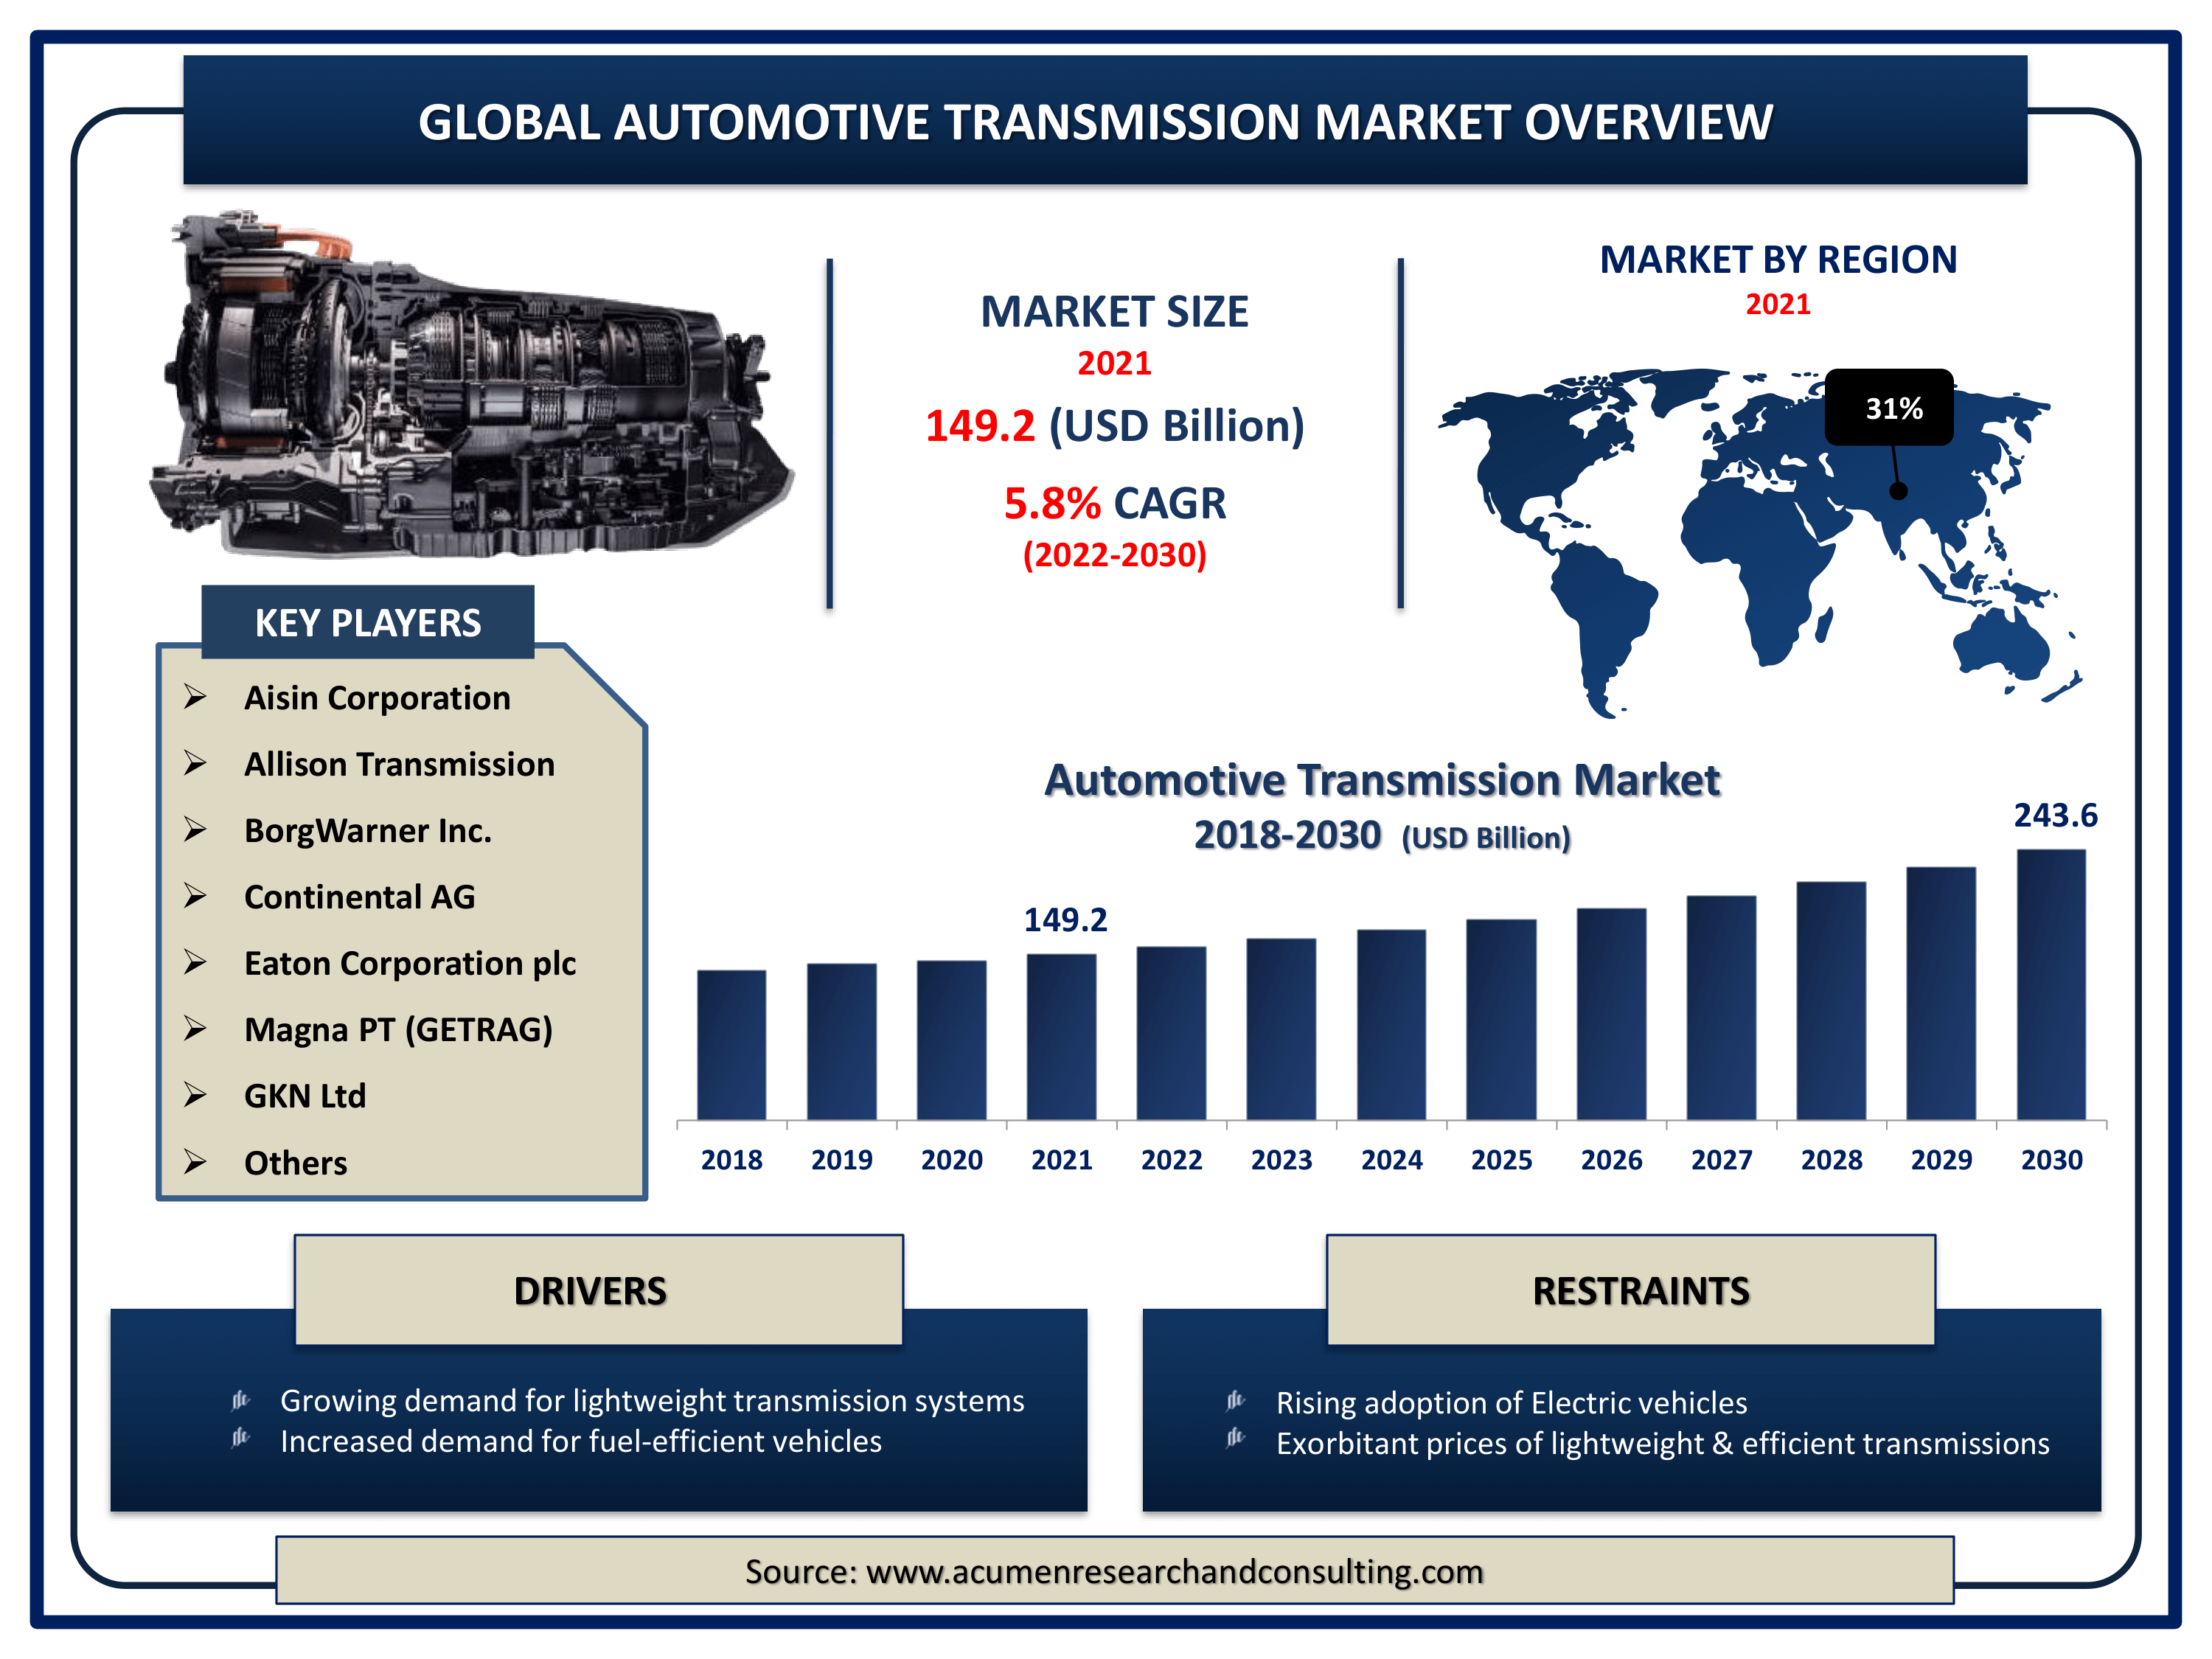 Global automotive transmission market revenue is expected to increase by USD 243.6 billion by 2030, with a 5.8% CAGR from 2022 to 2030